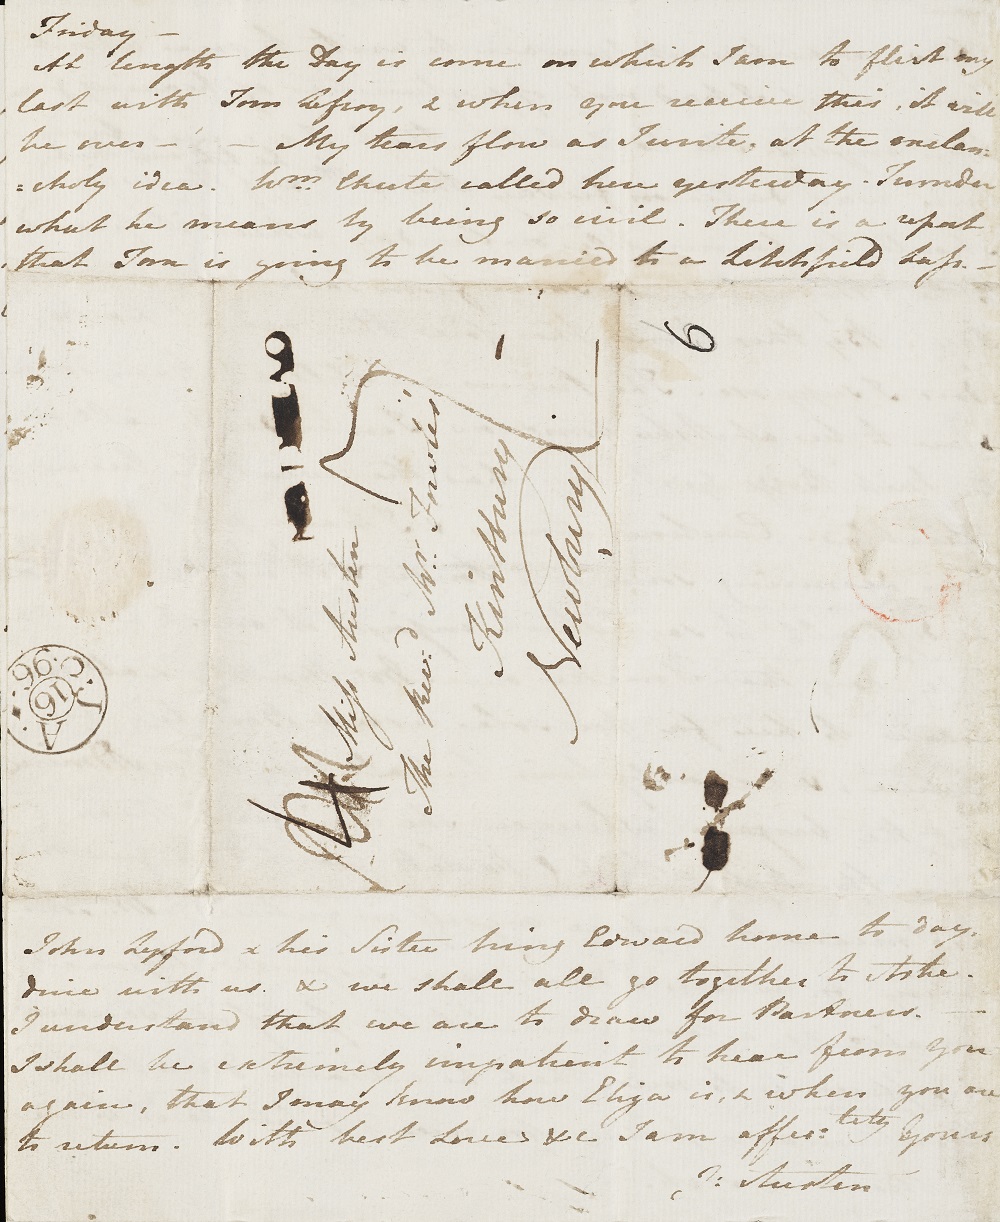 Page 4 of Jane's letter to Cassandra, written from Steventon on 14-Friday 15 January 1796